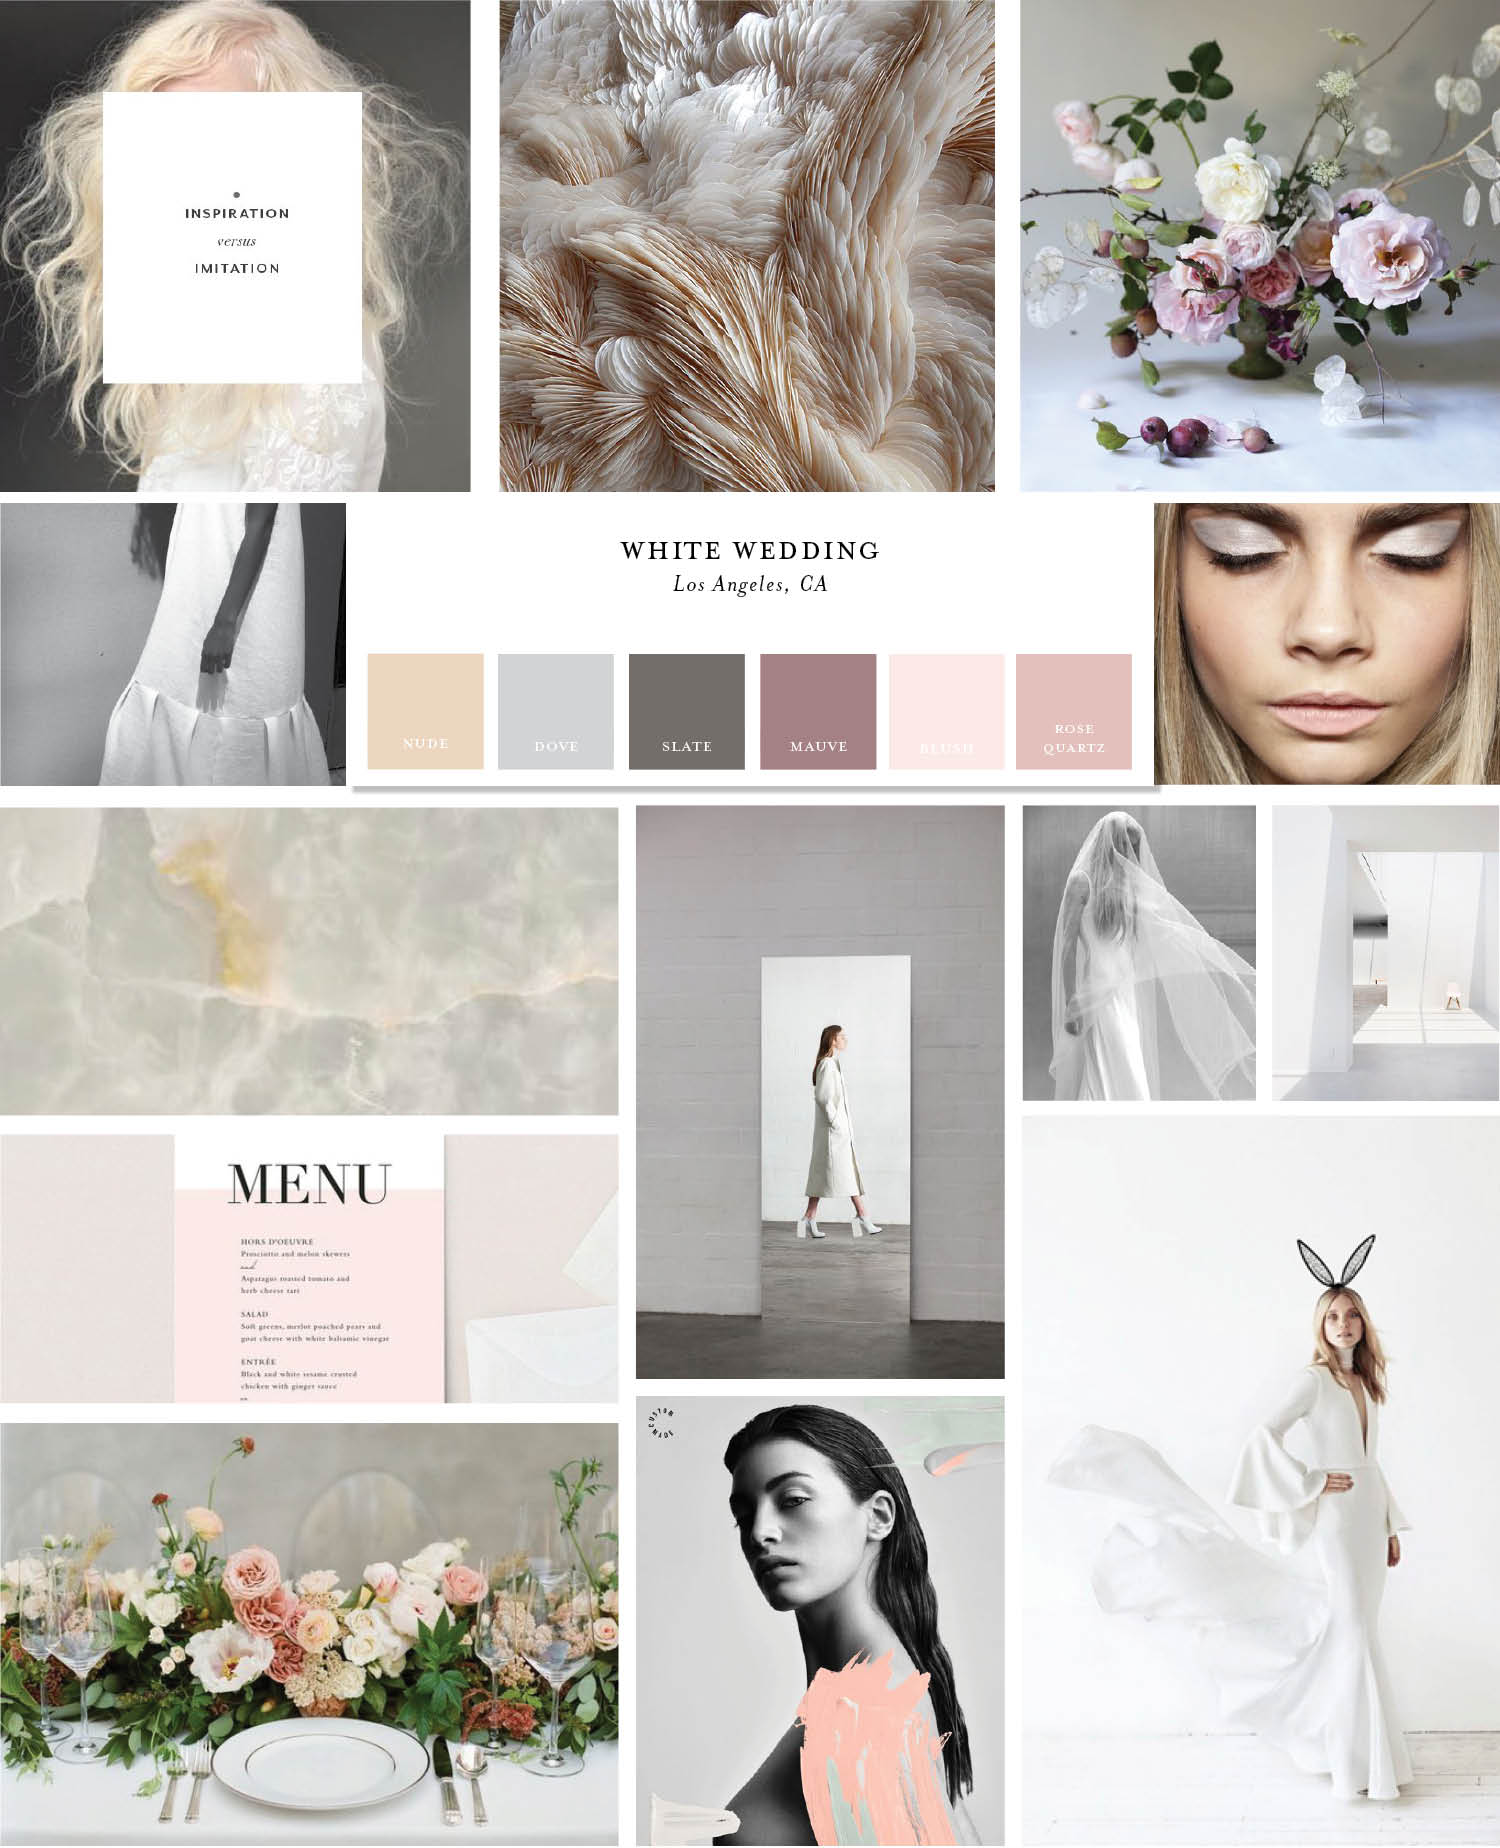 Modern White City Wedding Inspiration by Design and Wedding Planning Experts The Nouveau Romantics